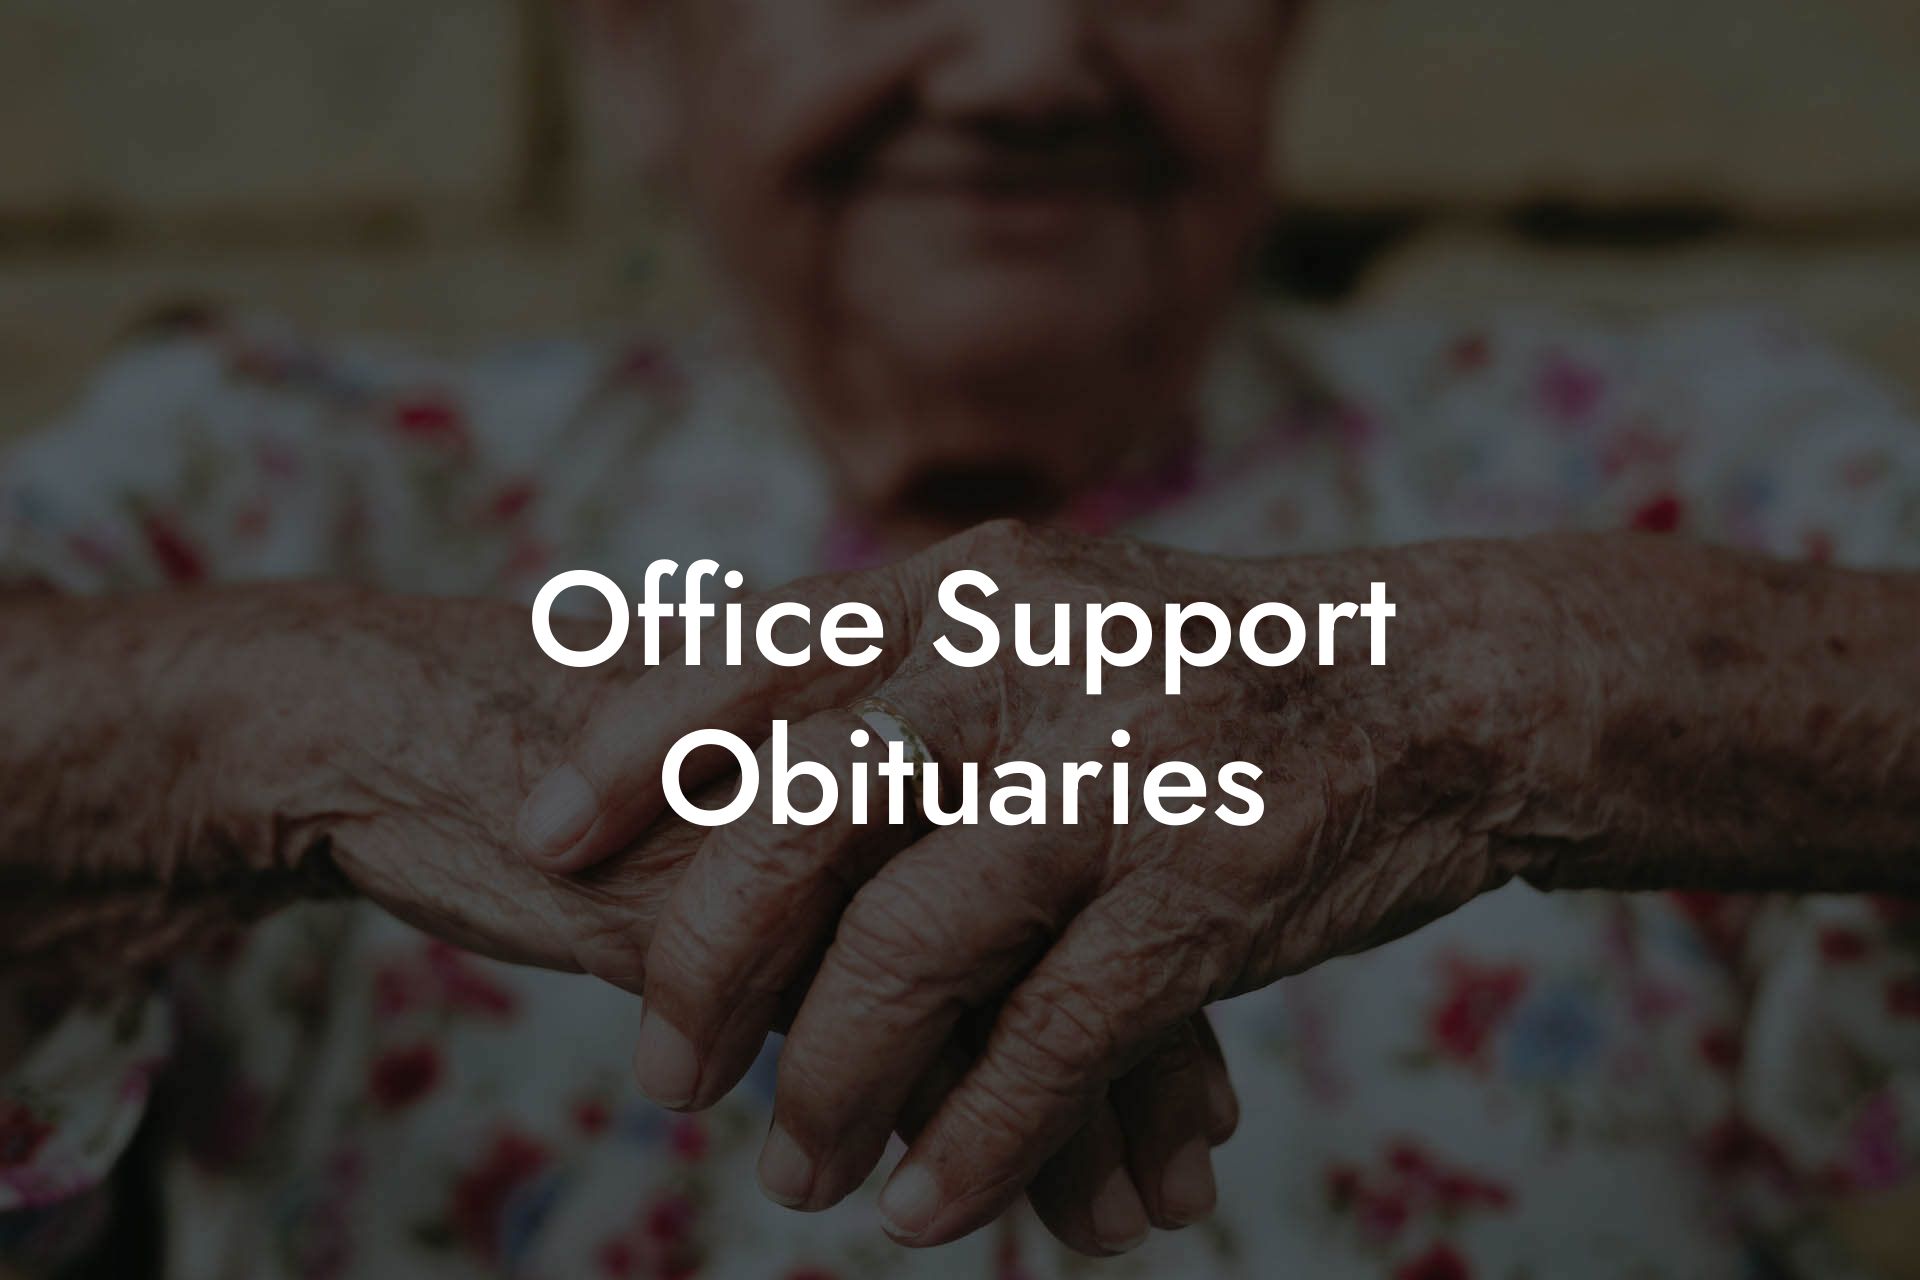 Office Support Obituaries